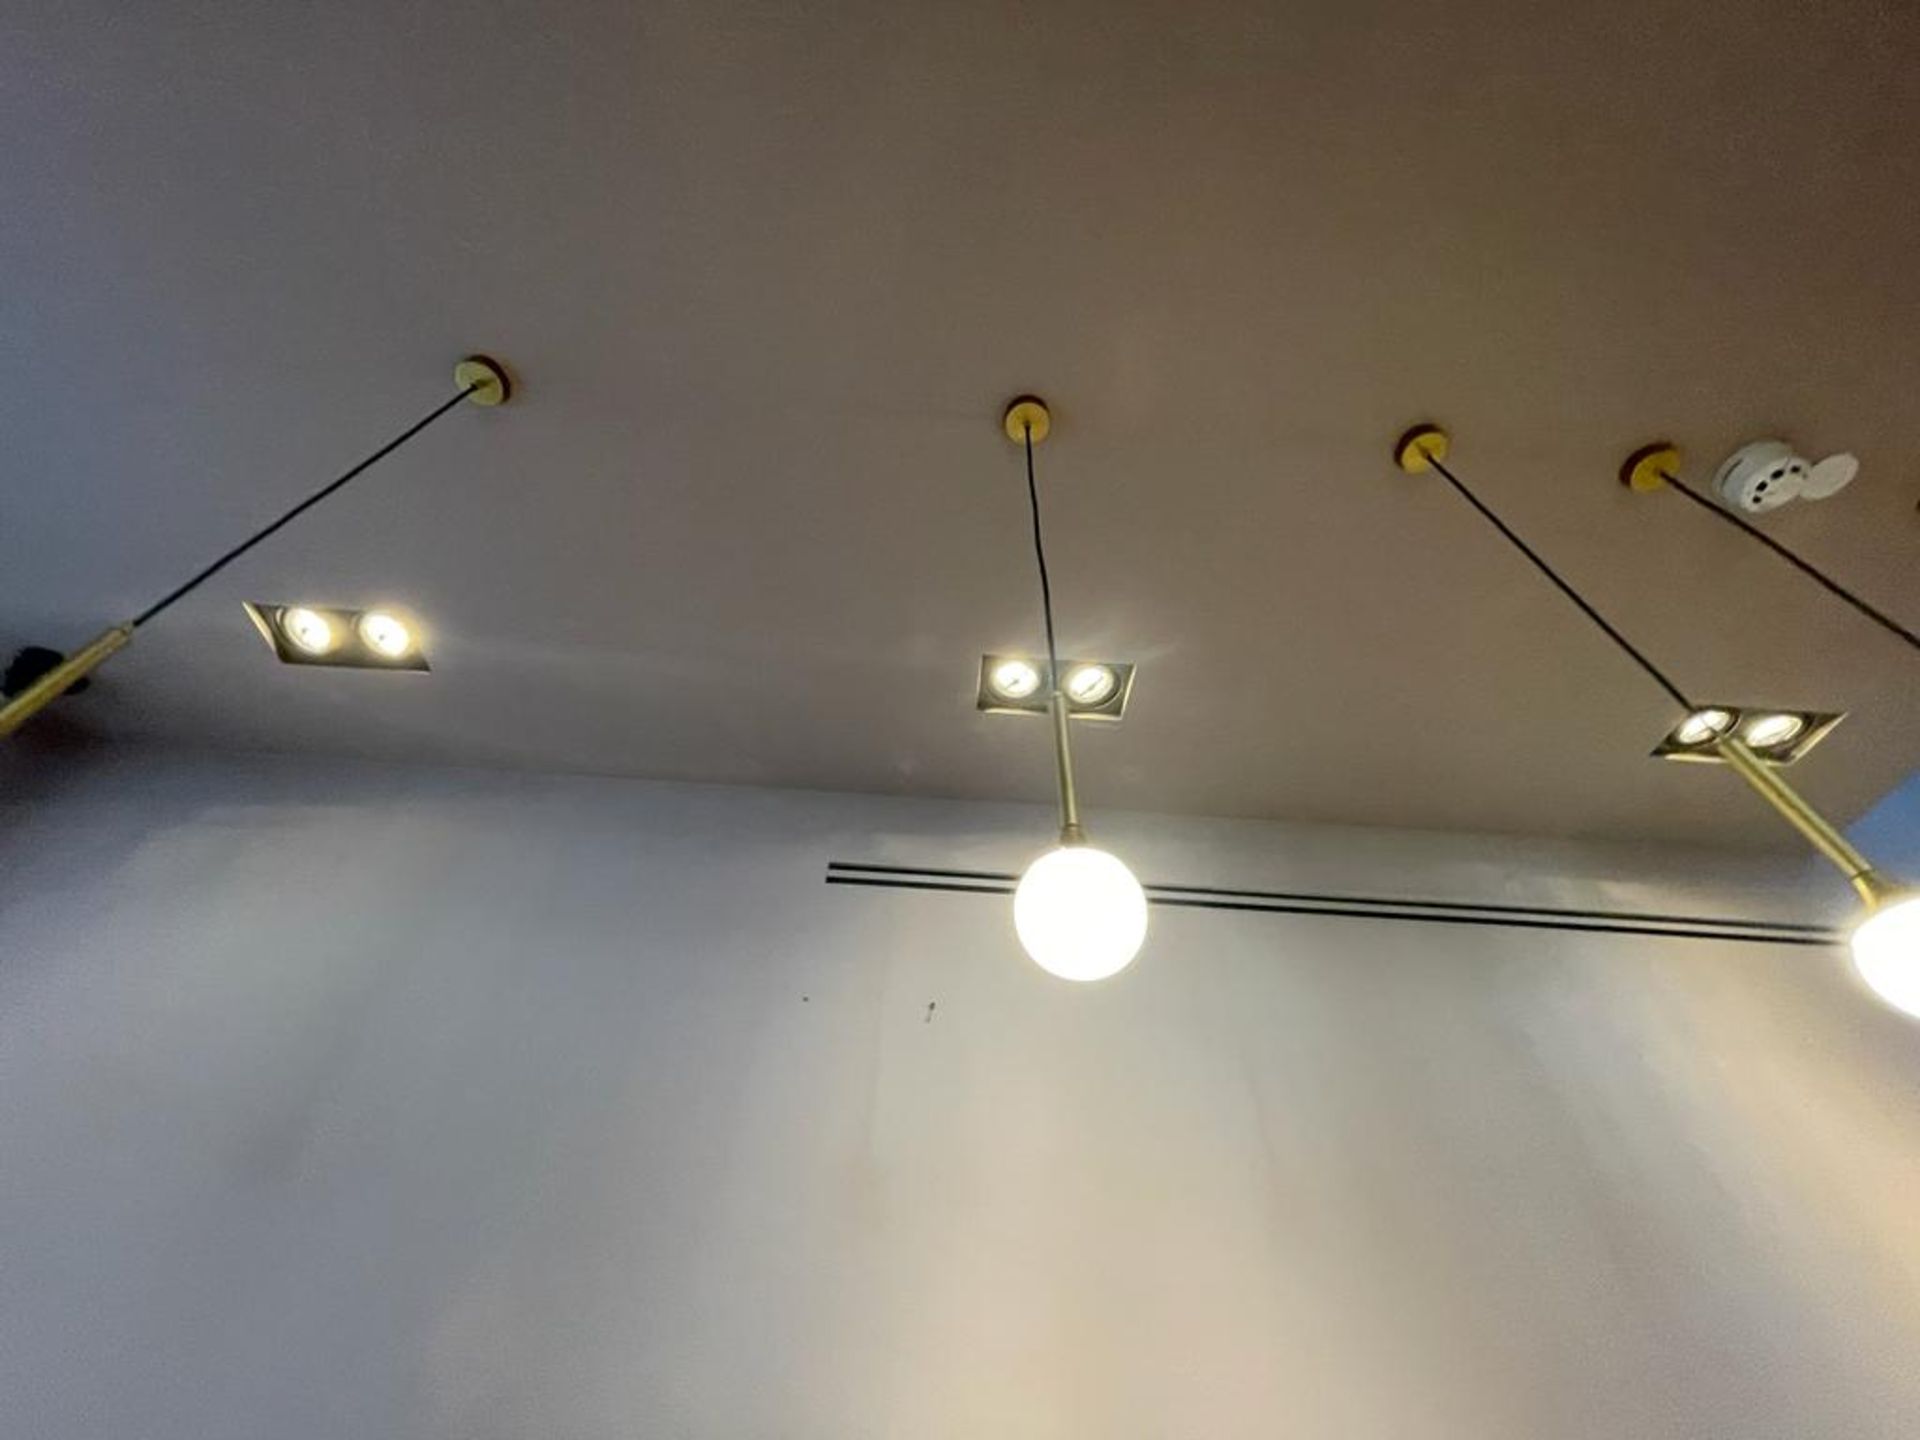 4 x Hand Made 'Petite' Suspension LED Ceiling Lights By Delight Lighting - Image 11 of 12